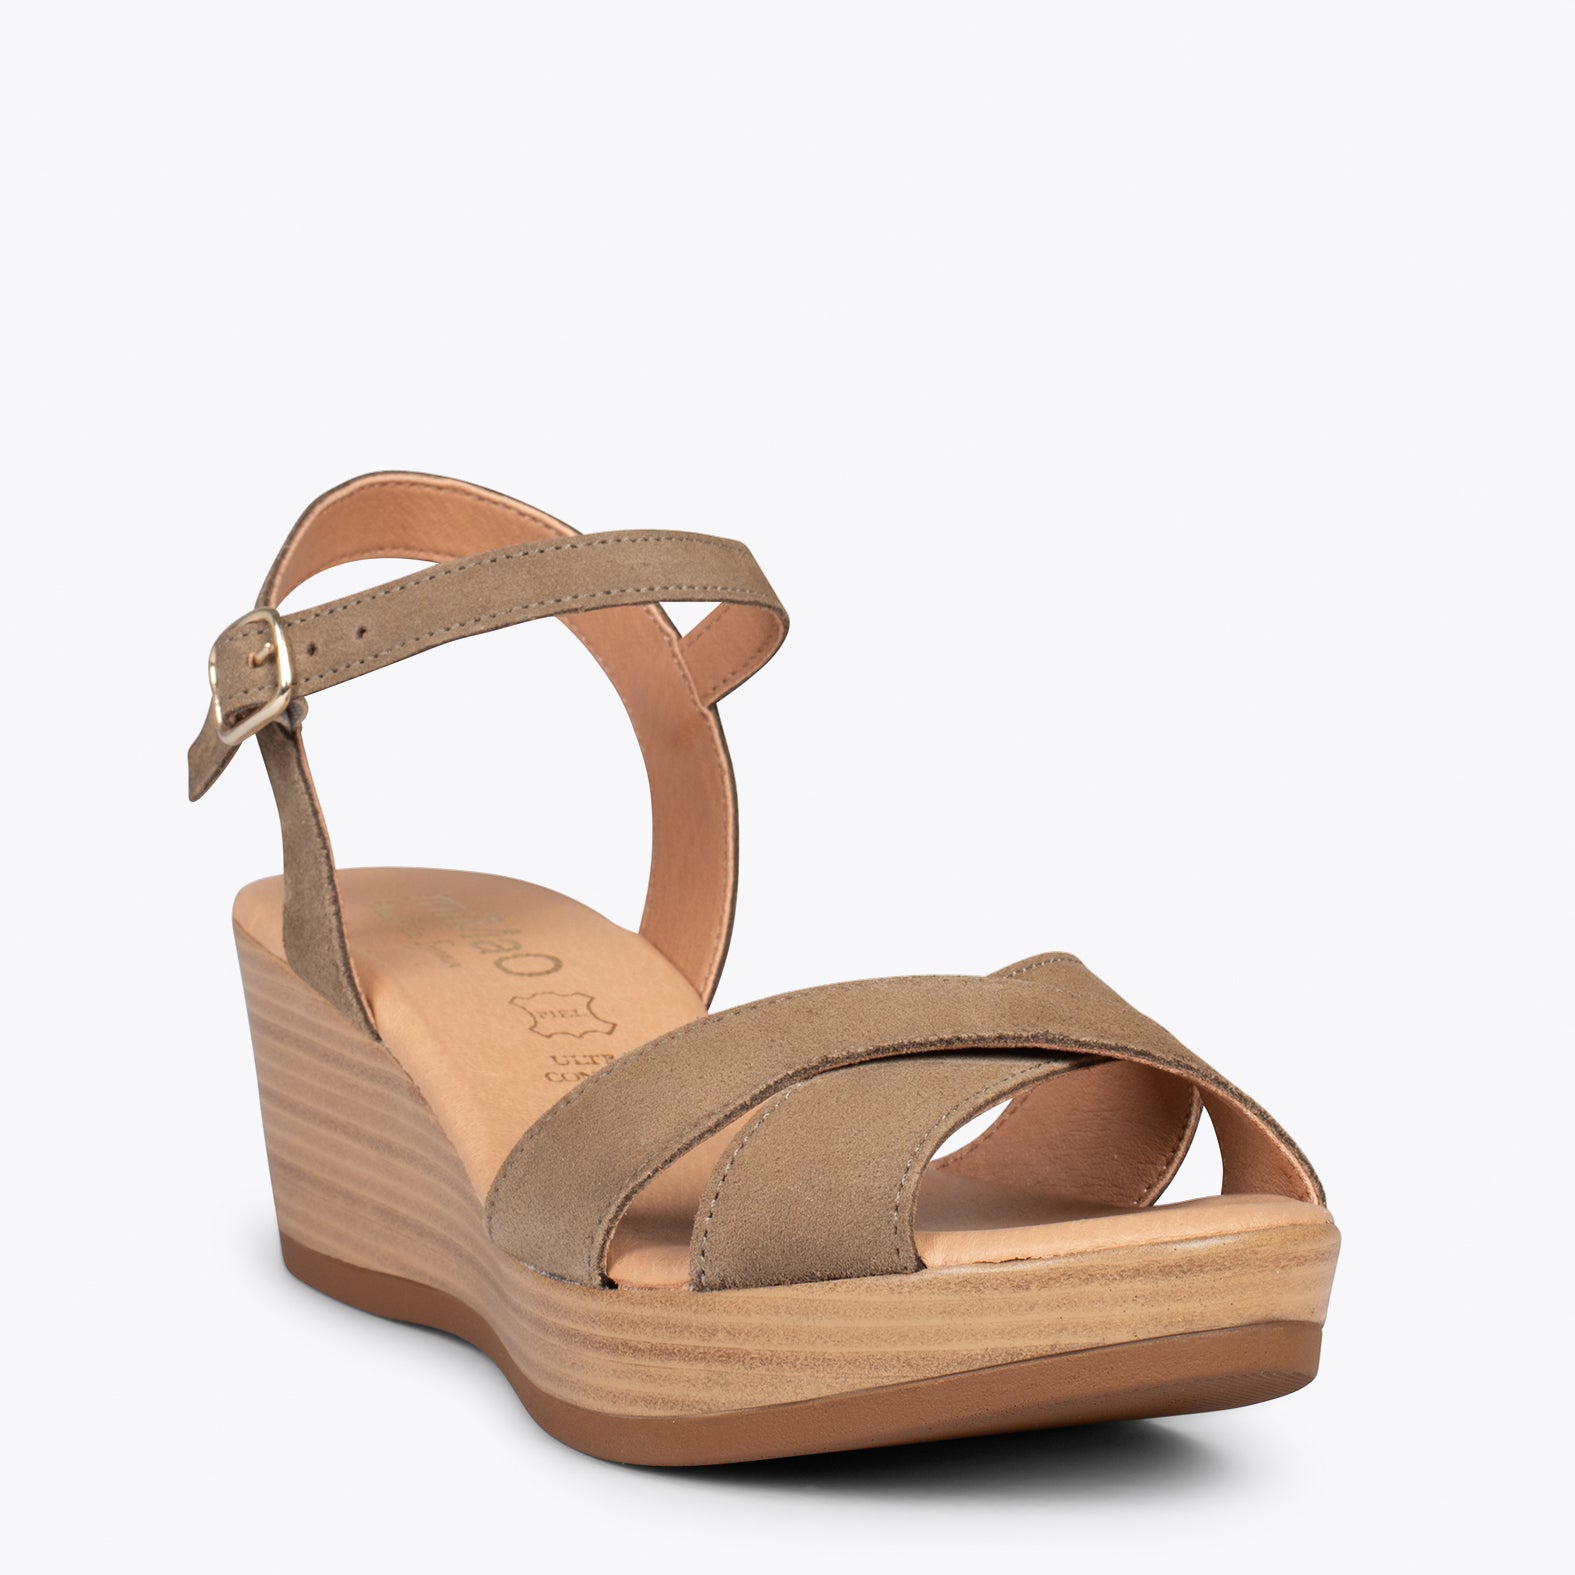 SEA- TAUPE comfortable sandal with wedge